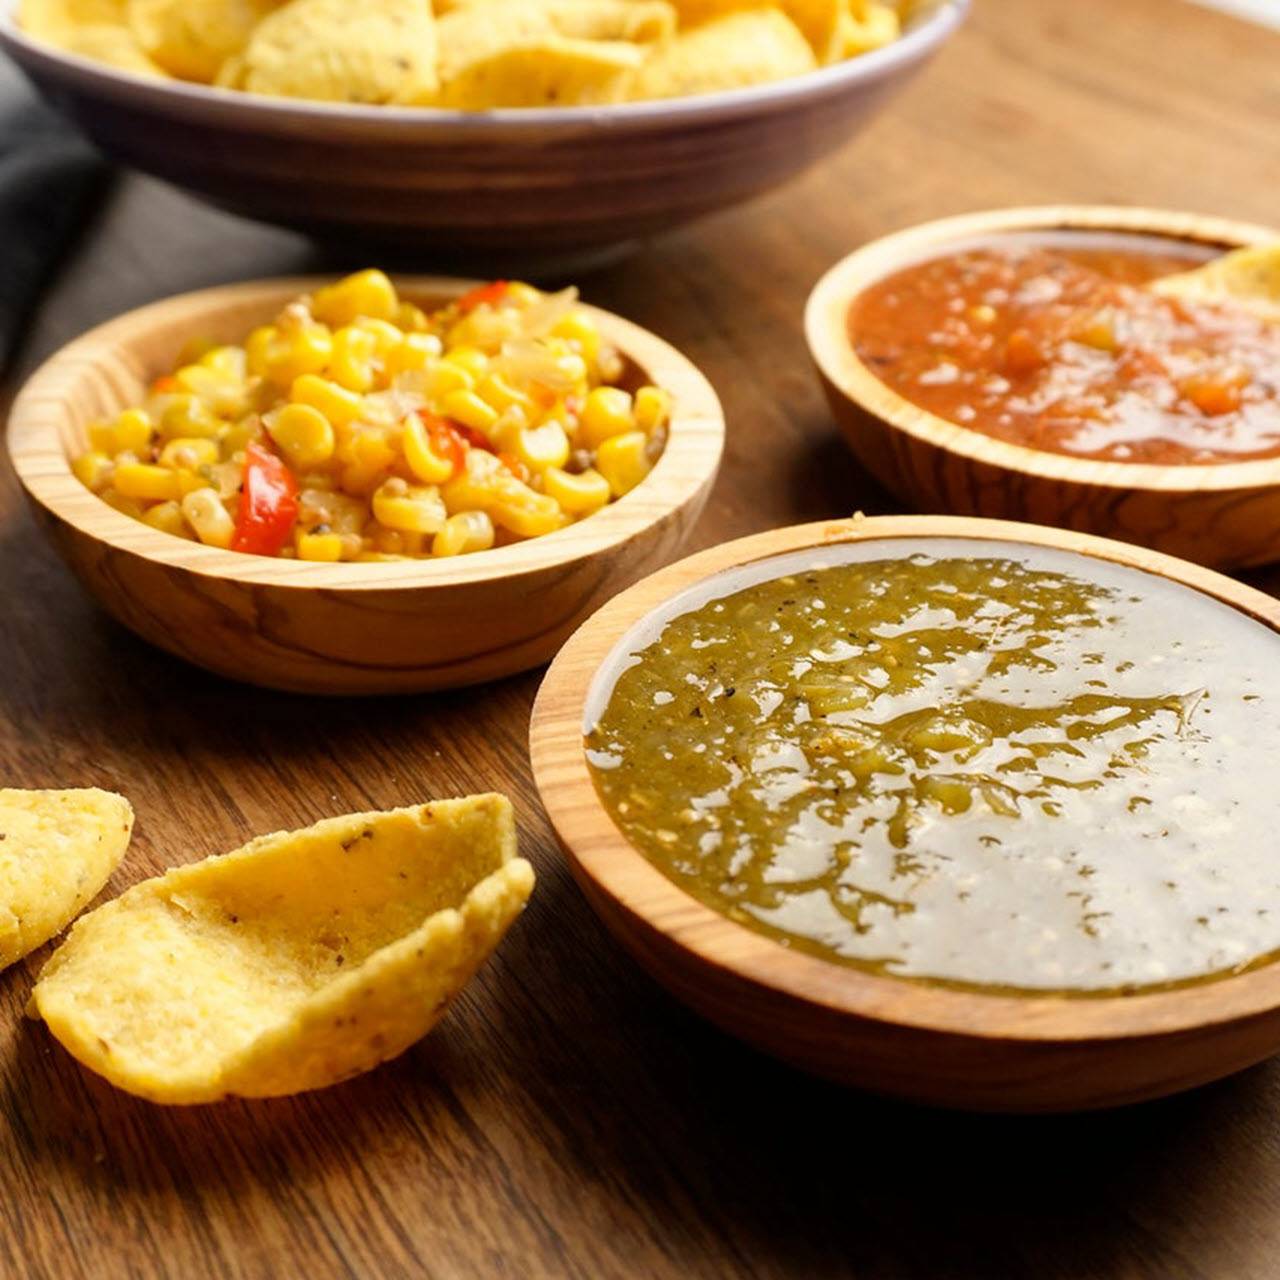 The RSVP International dipping bowls filled with condiments